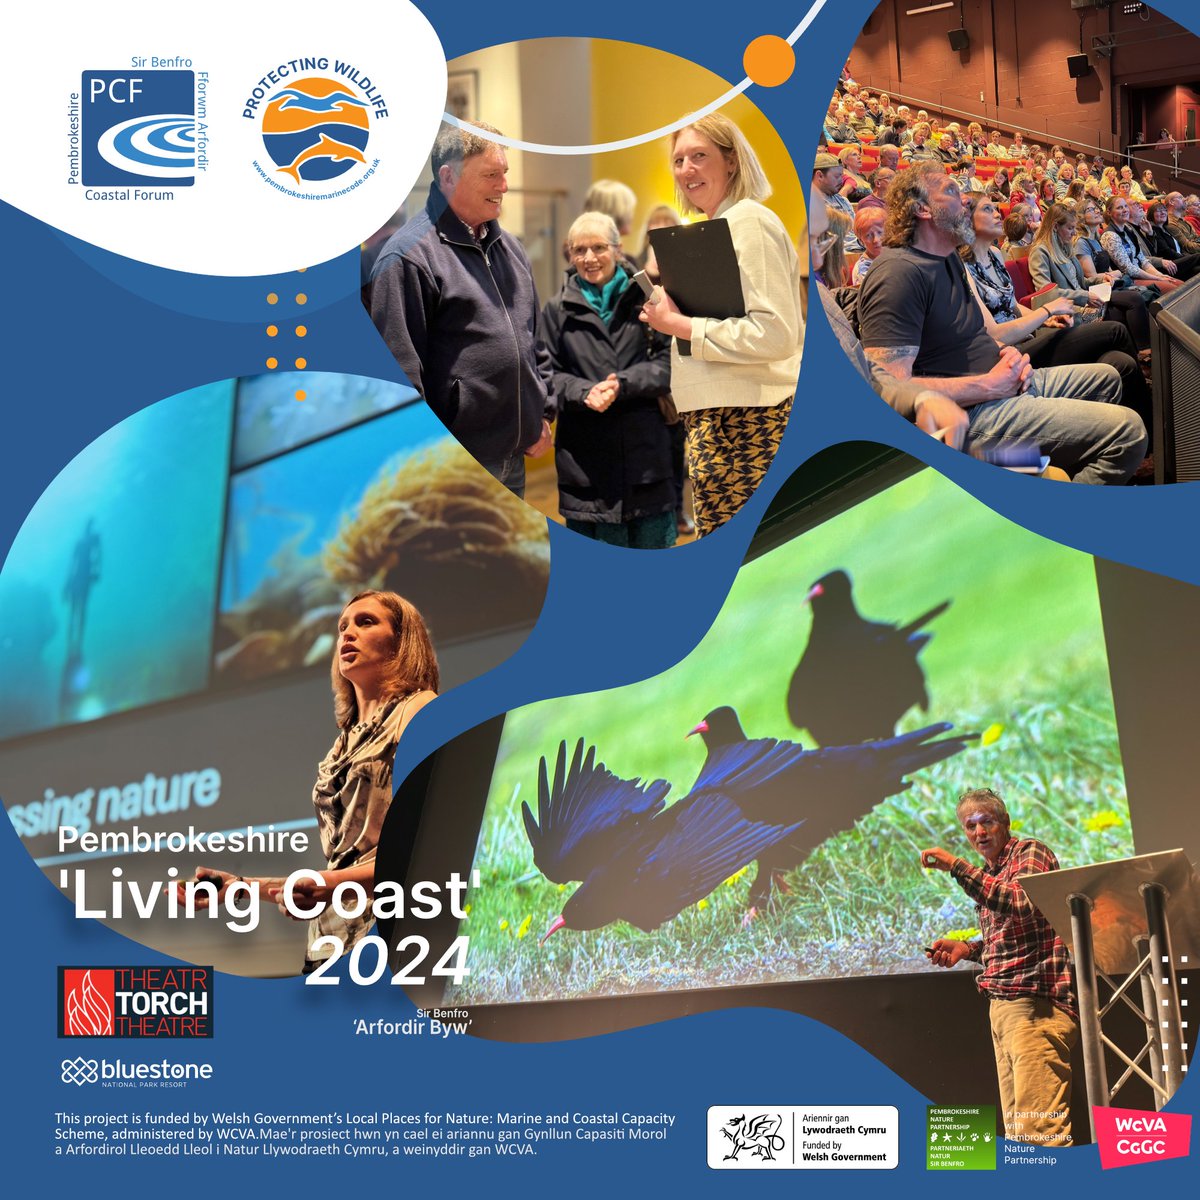 Huge thanks to all who attended the 'Pembrokeshire 'Living Coast' 2024' at @TorchTheatre! 🌟 Thanks @BluestoneWales, Lauren Eyles, Mair Elliot, & Ian Meopham for a memorable evening. Your passion for our coast shines! 🌊 #LivingCoast2024 #Pembrokeshire #CoastalConservation